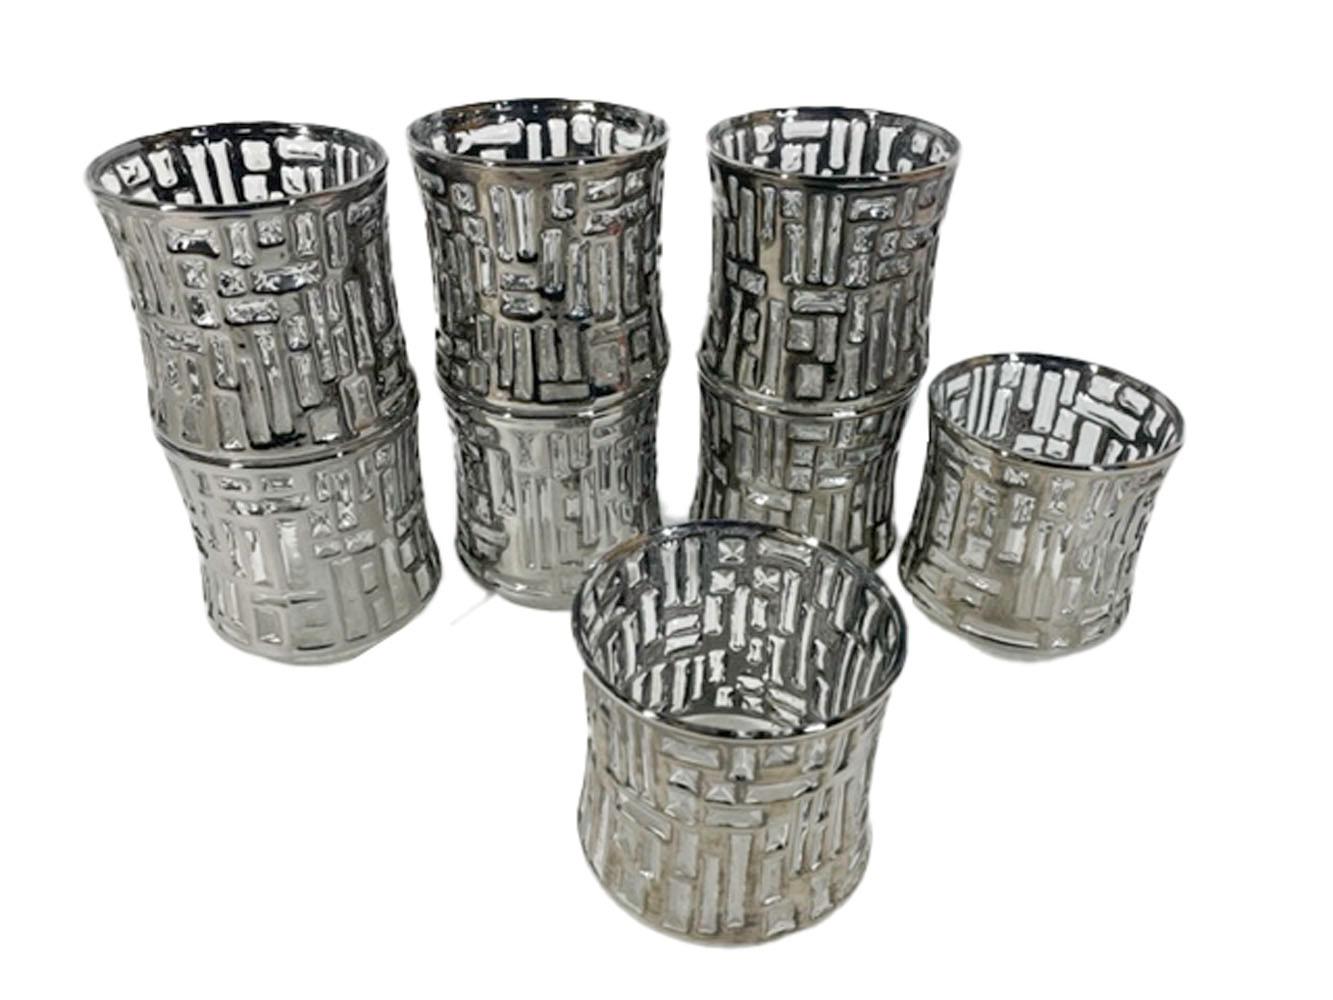 Eight Libbey rocks glasses in the Brutalist 